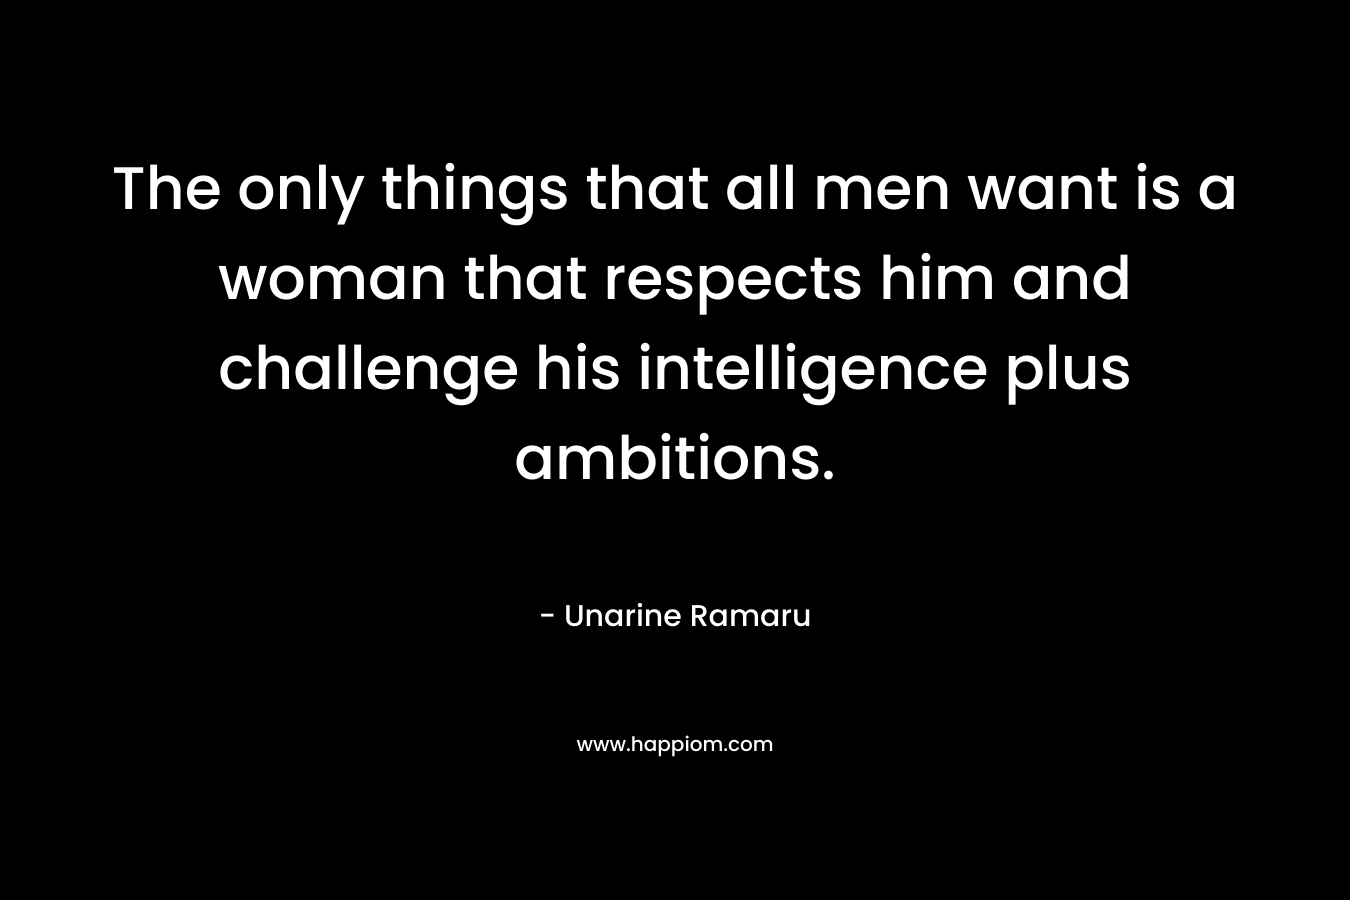 The only things that all men want is a woman that respects him and challenge his intelligence plus ambitions.